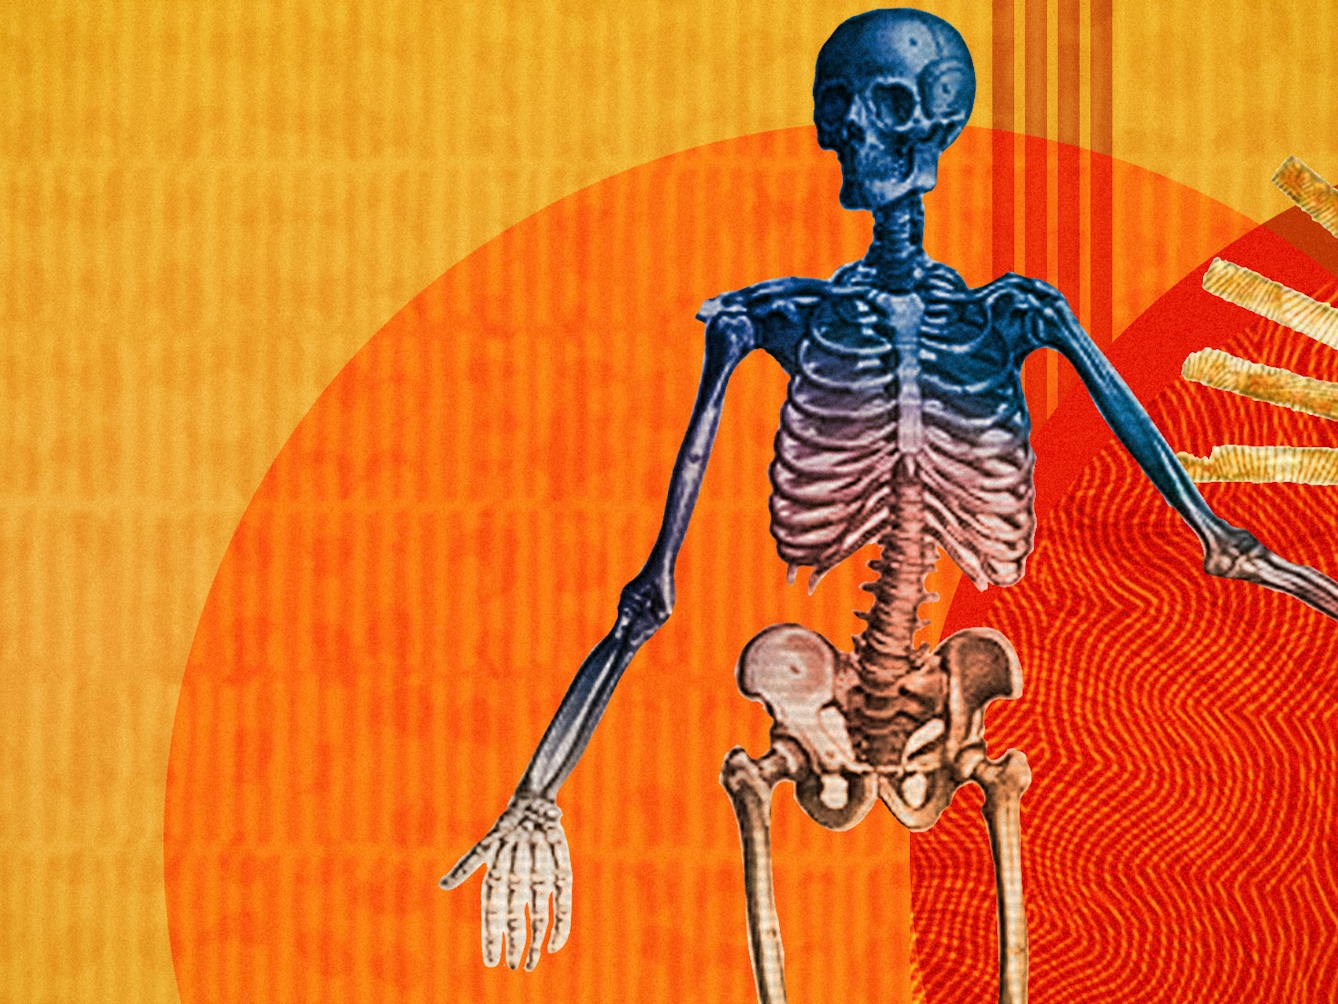 Detail from a larger abstract digital illustration featuring three anatomical depictions of the human body. This image shows the skeletal bone structure. Circles of energy are shown to be radiating from each of the bodies, overlapping each other. The main colour combinations are yellows, reds and oranges. The background shapes contain textures and patterns.